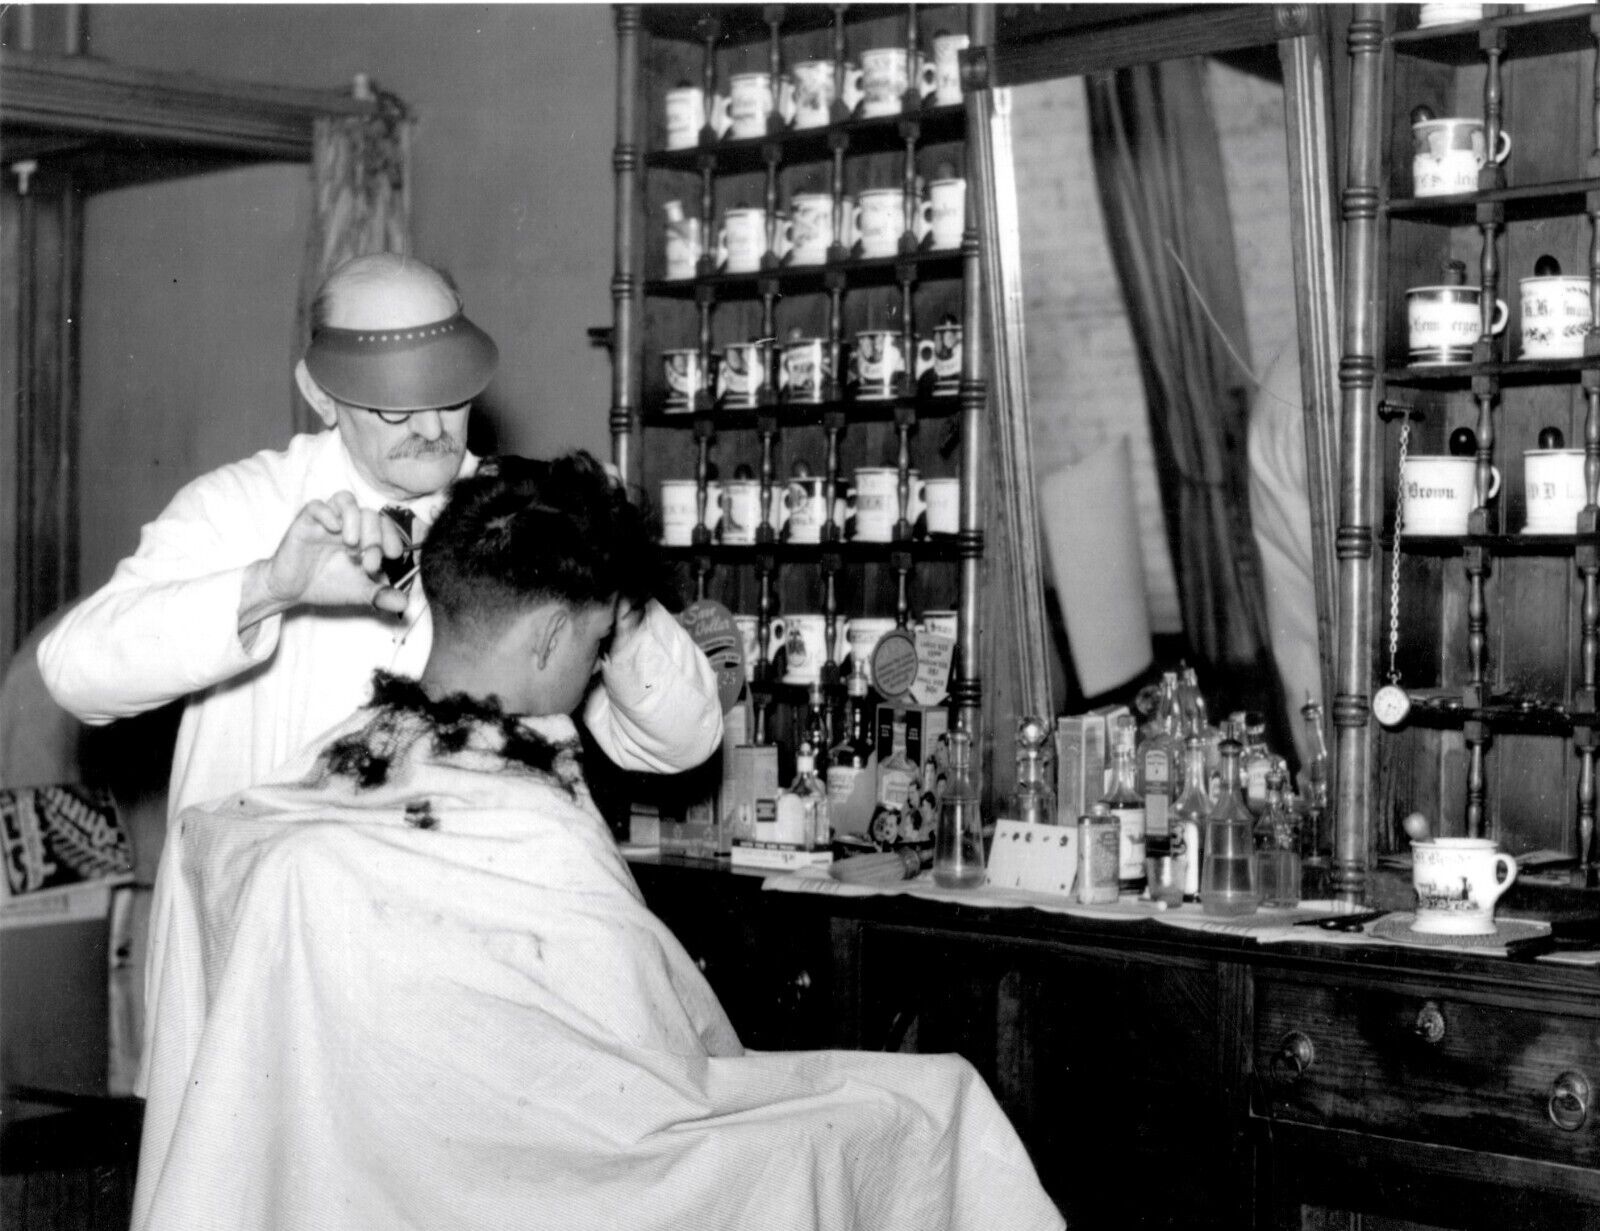 OLD FASHIONED BARBER SHOP IN MARYLAND 1940\'S 8x10 GLOSSY FINISH PHOTOGRAPH